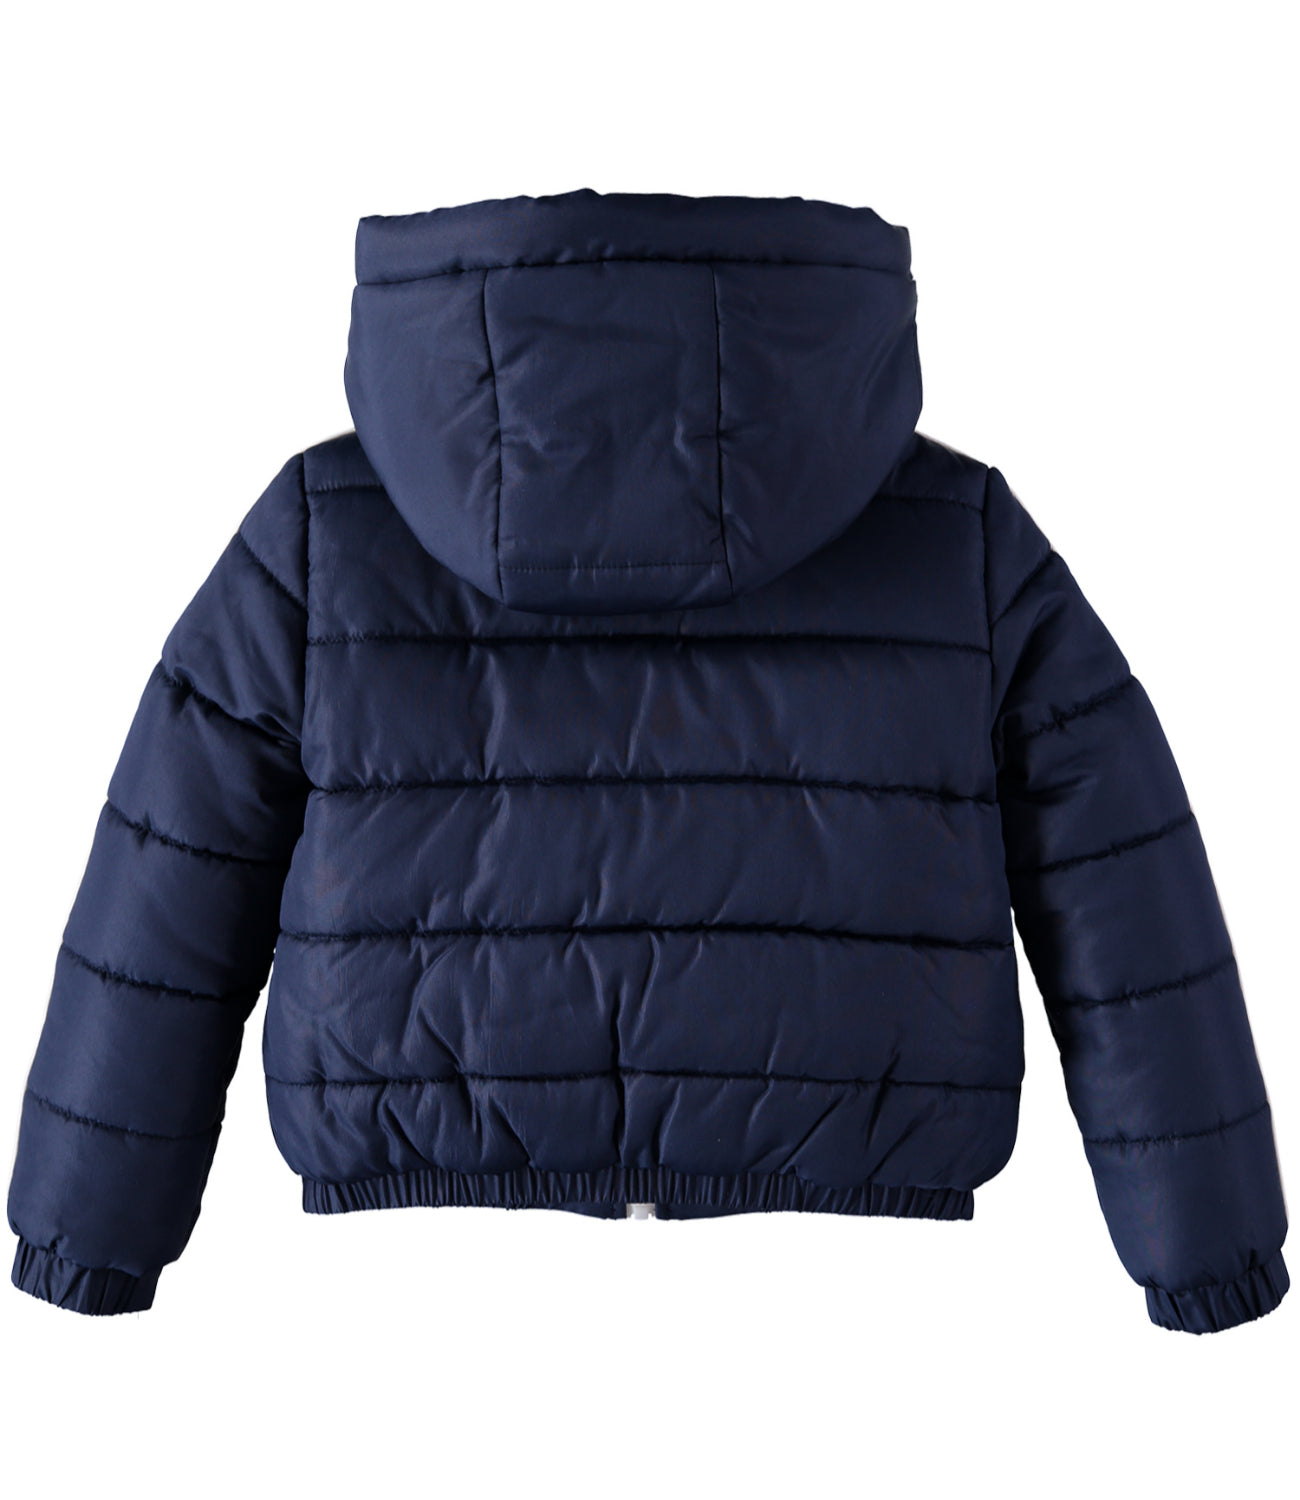 Rothschild Boys 4-7 Panel Puffer Jacket with Matching Hat